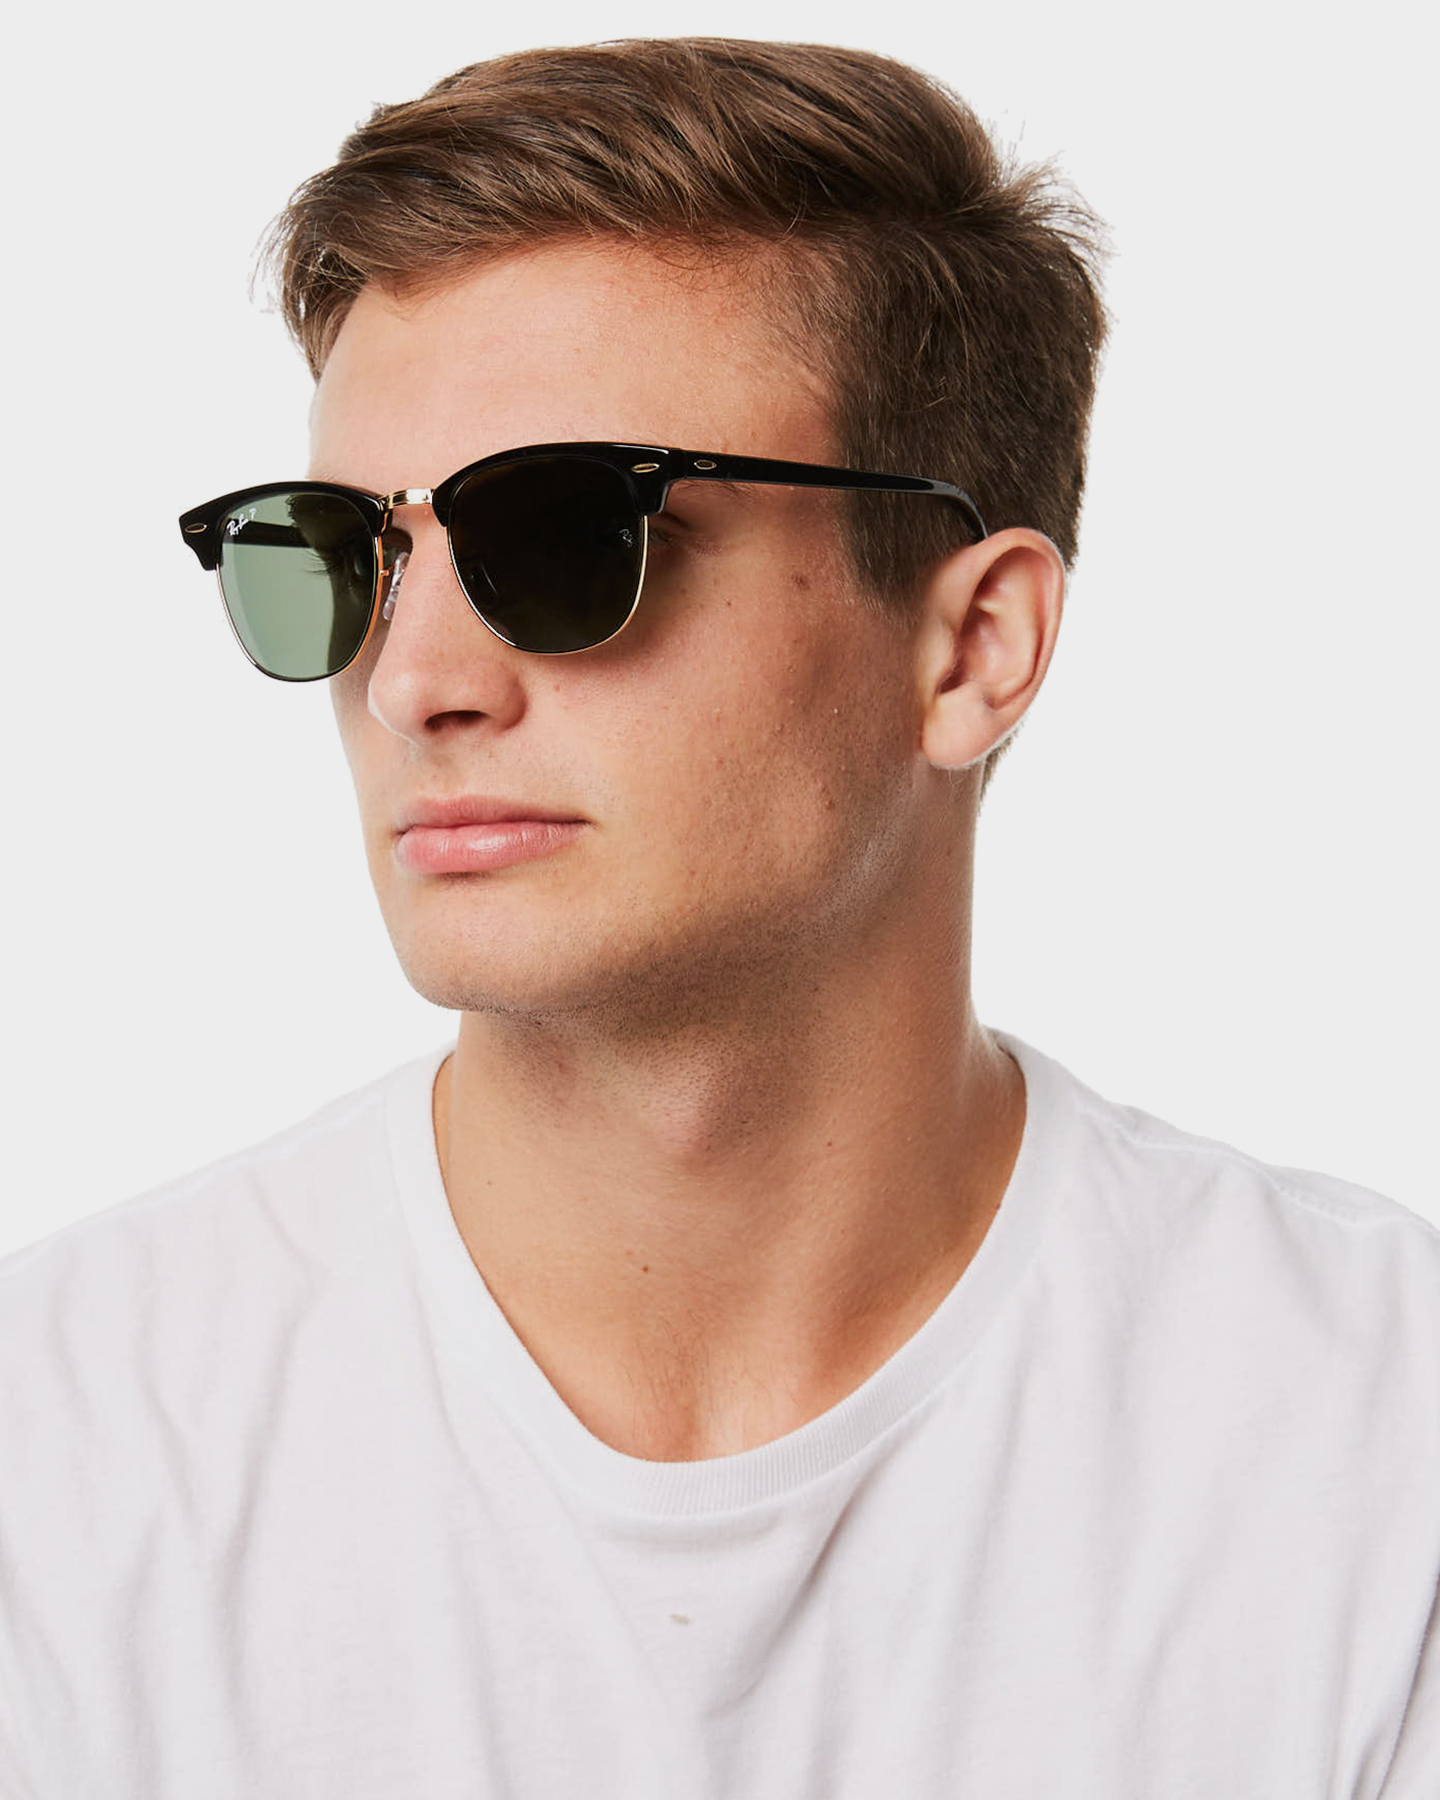 The Daily Low Price Sunglasses Polarized Sunglasses RB3528 Ray Banmens 